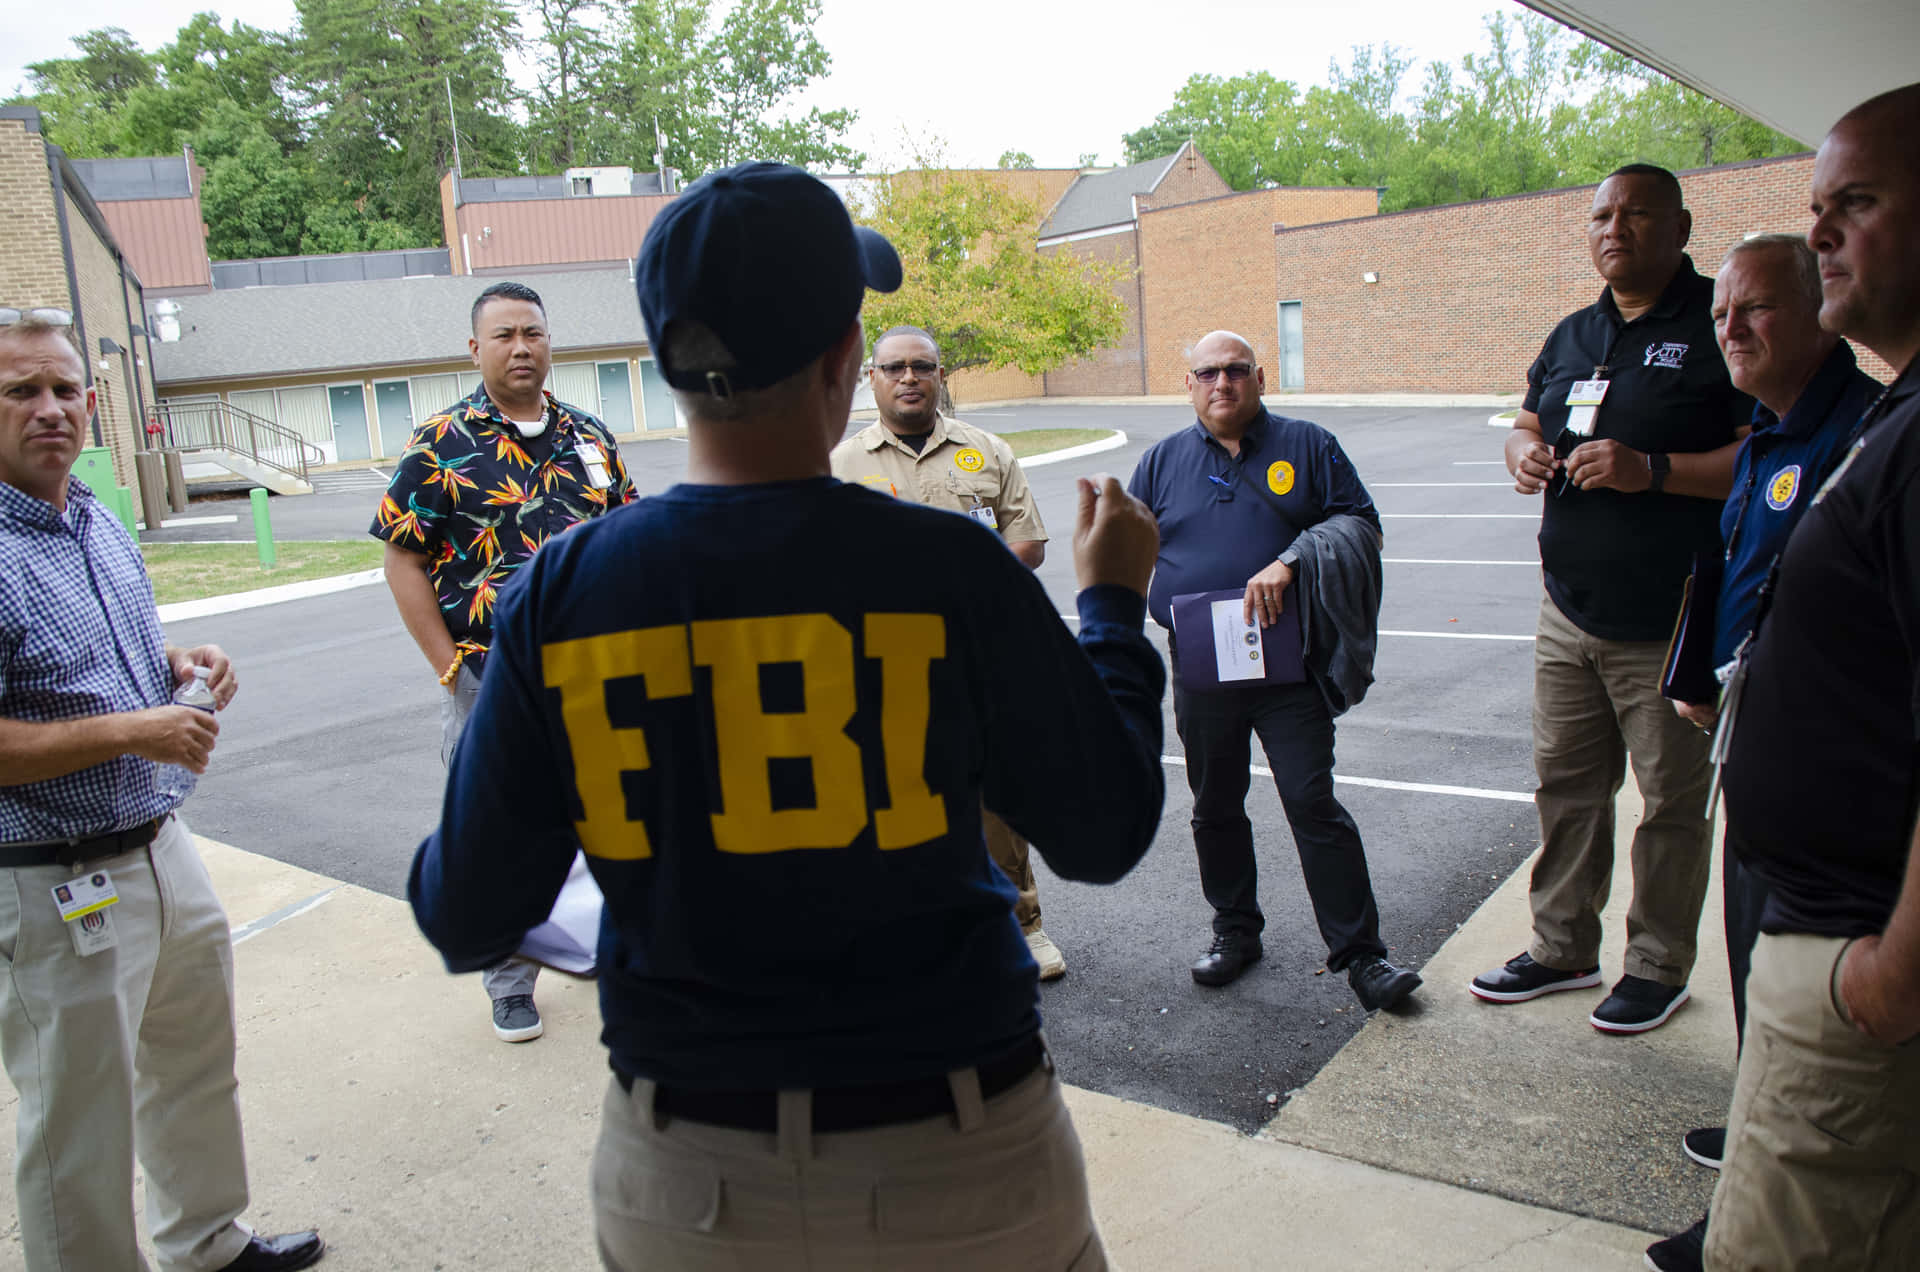 The Fbi Seal In The Forefront Background